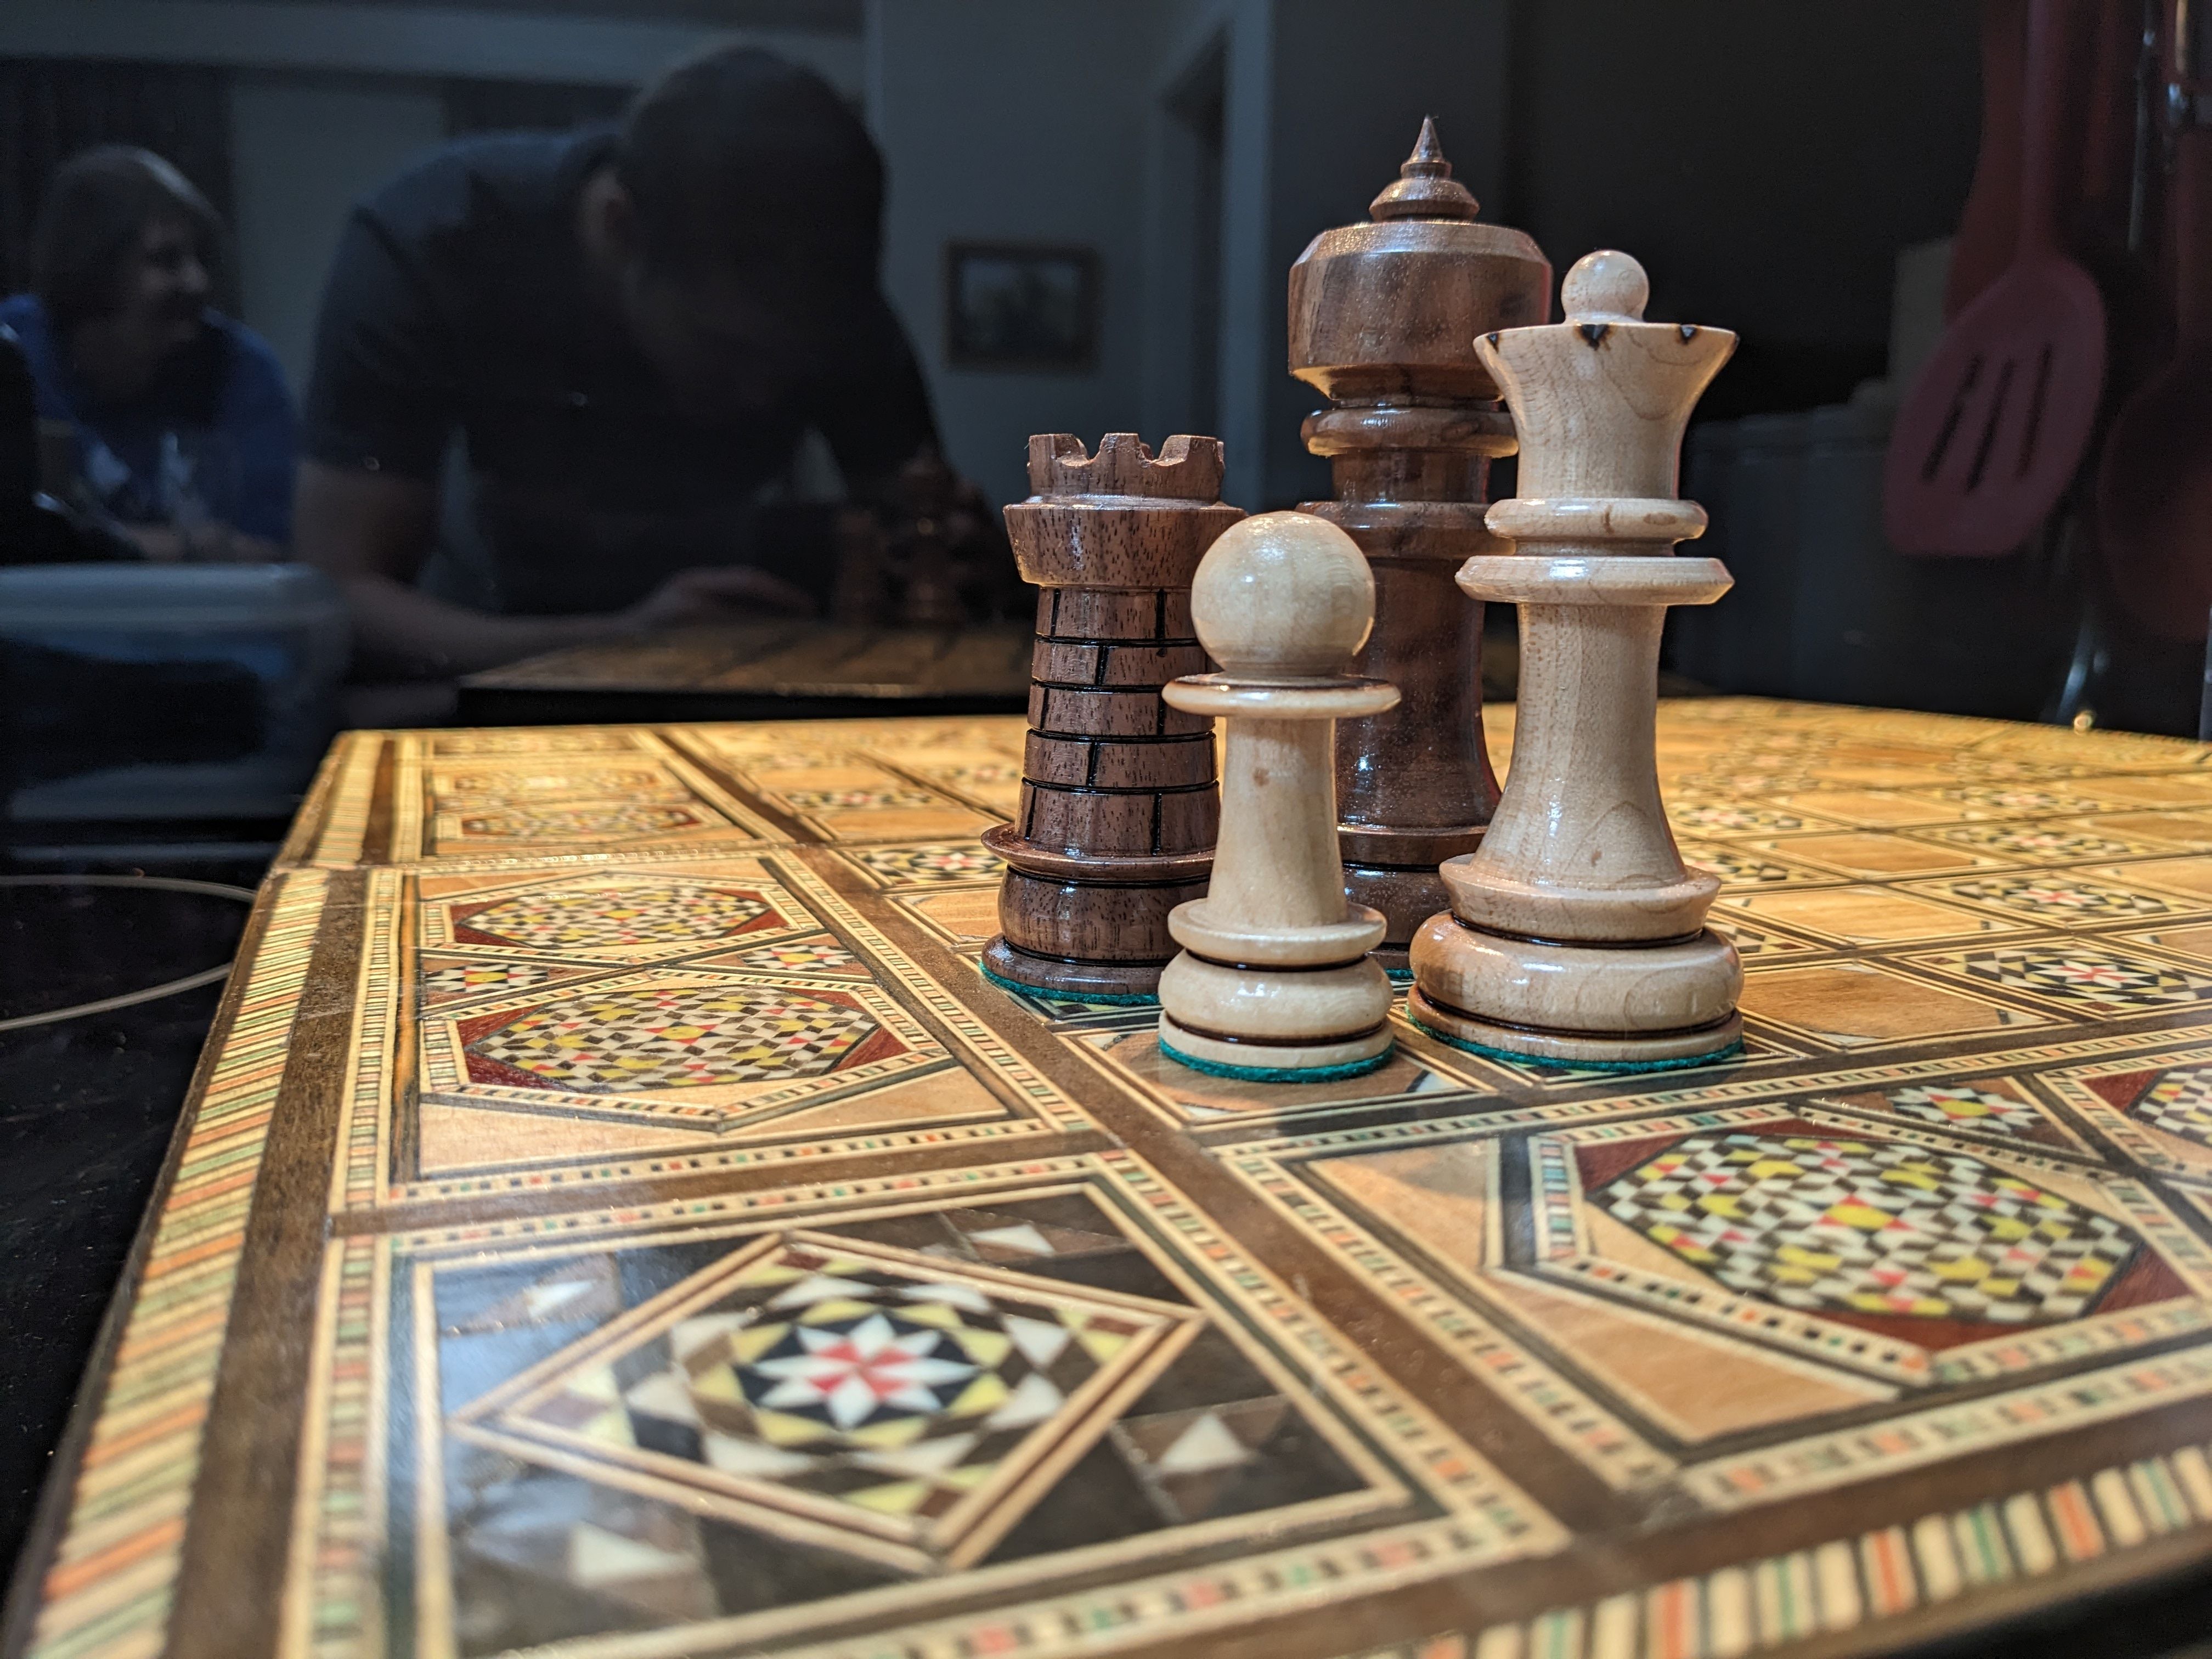 Assignment 3: Chess Pieces